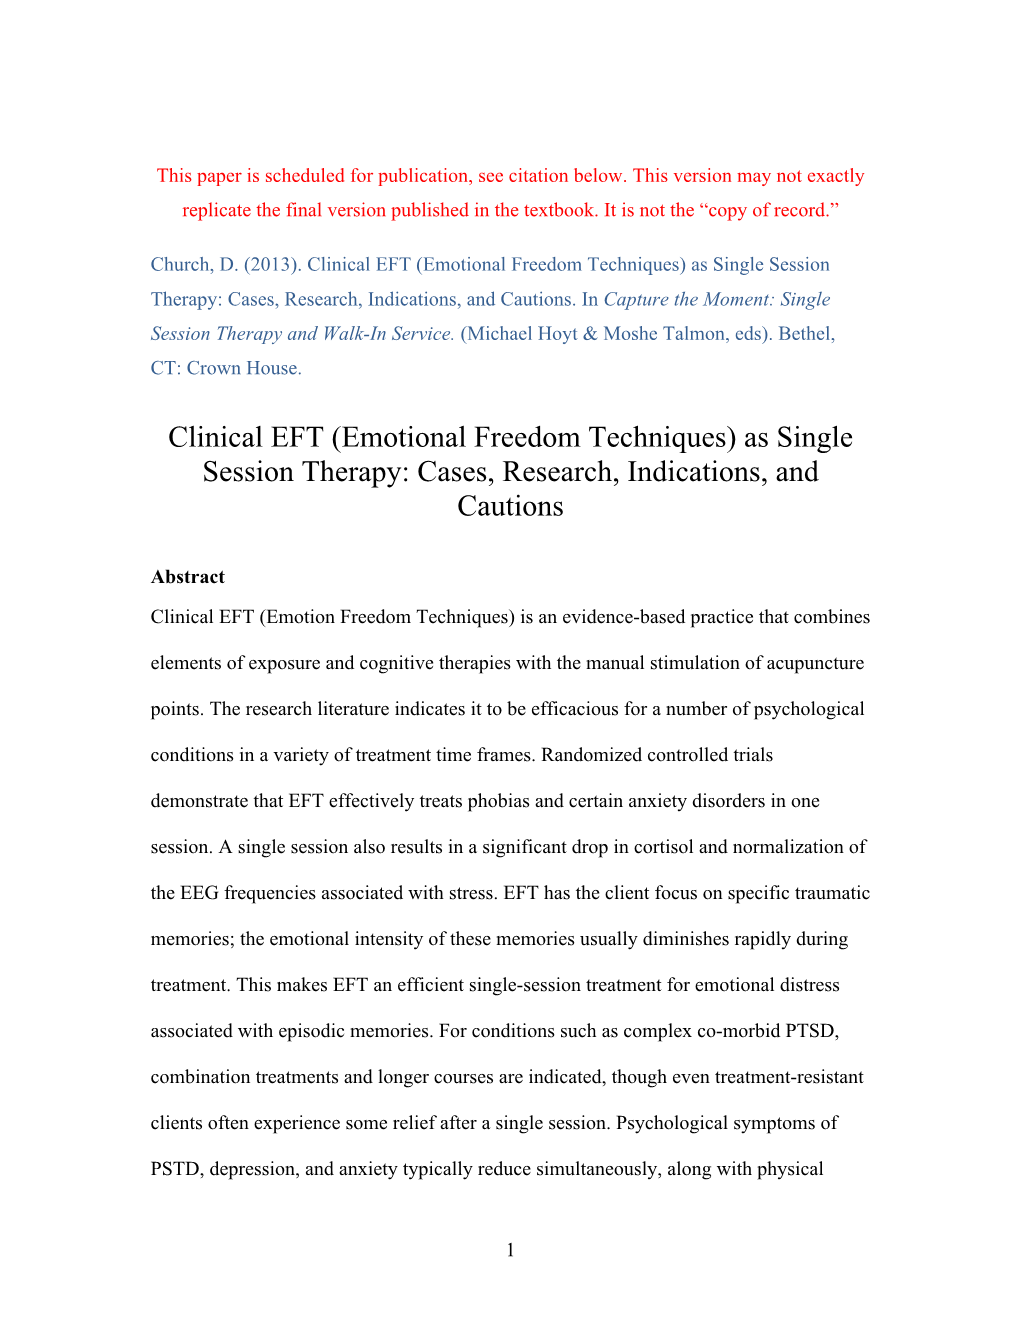 Clinical EFT (Emotional Freedom Techniques) As Single Session Therapy: Cases, Research, Indications, and Cautions